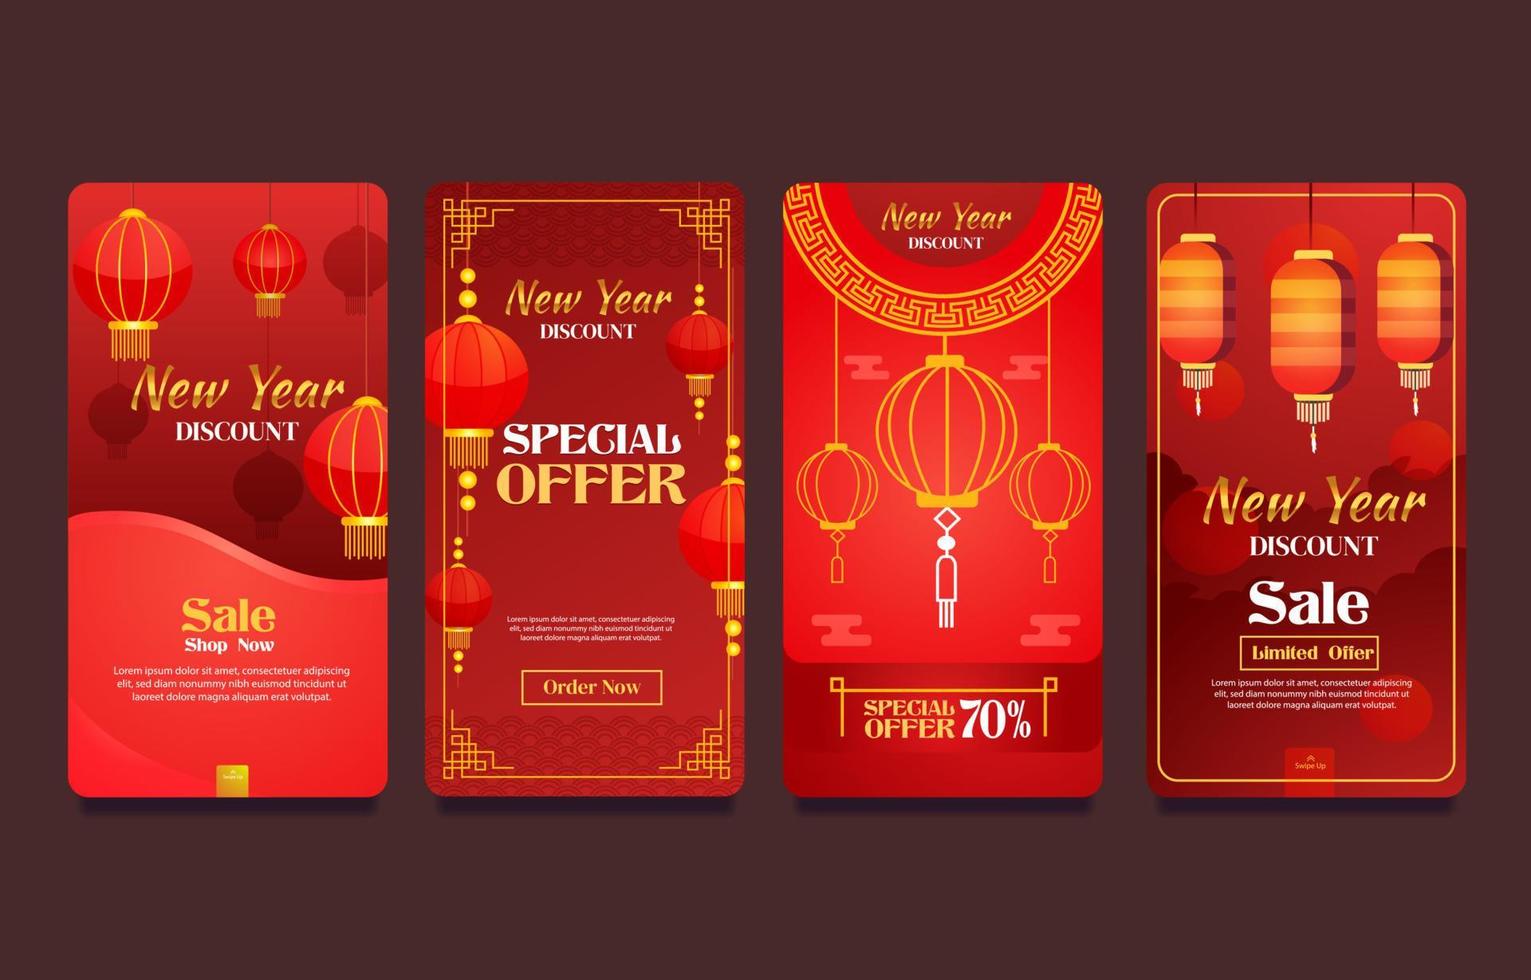 Chinese New Year Promotion Template with Red Lanterns 4393656 Vector